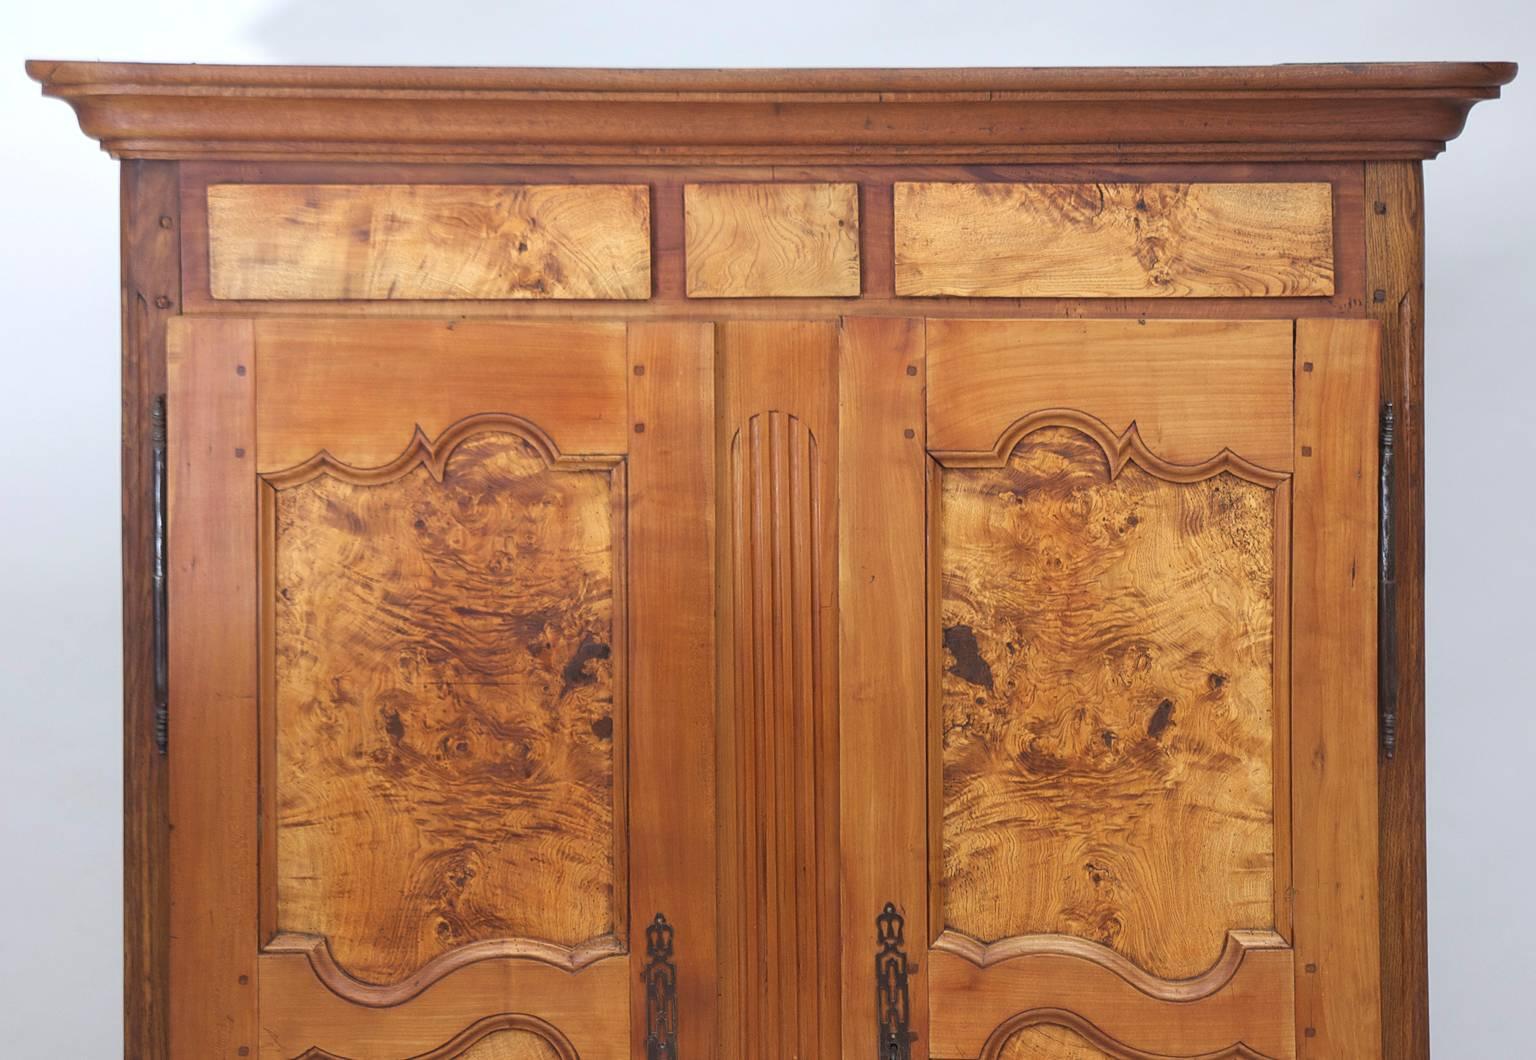 Oiled 19th Century Antique French Armoire in Walnut & Cherry with Burl Olive Ash Panel